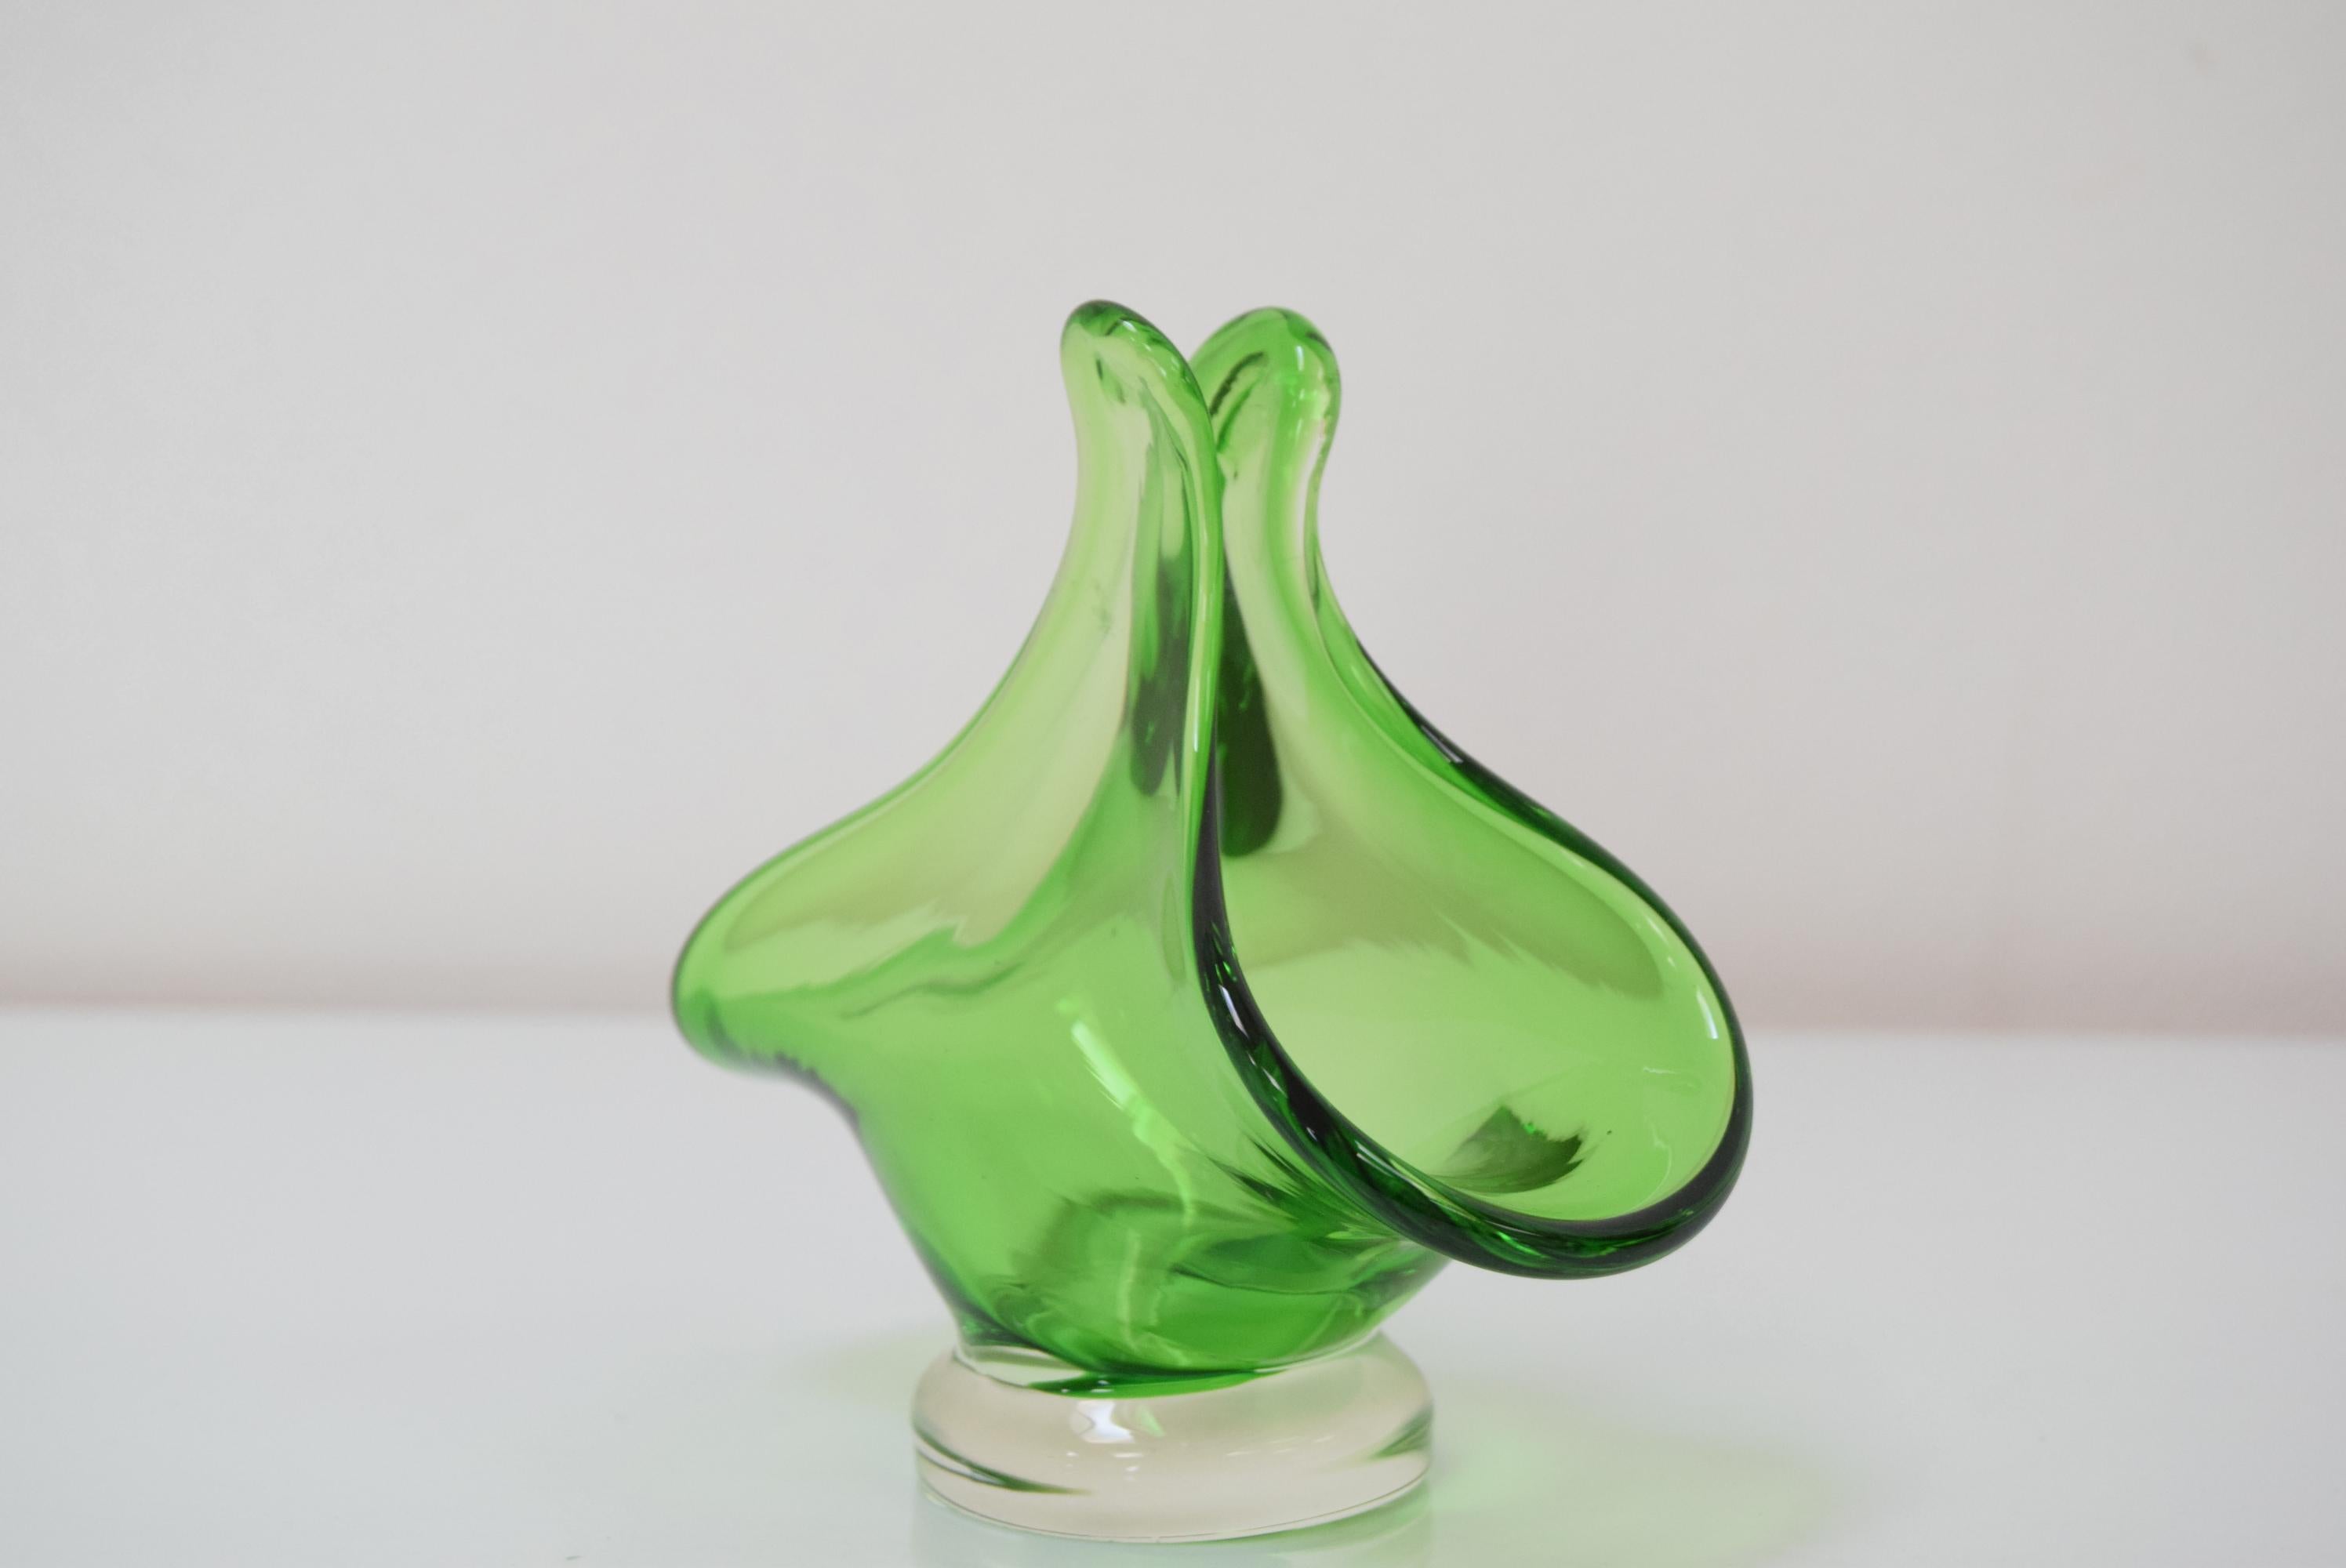 Made in Czechoslovakia
Made of art glass
Re-polished
Original condition.